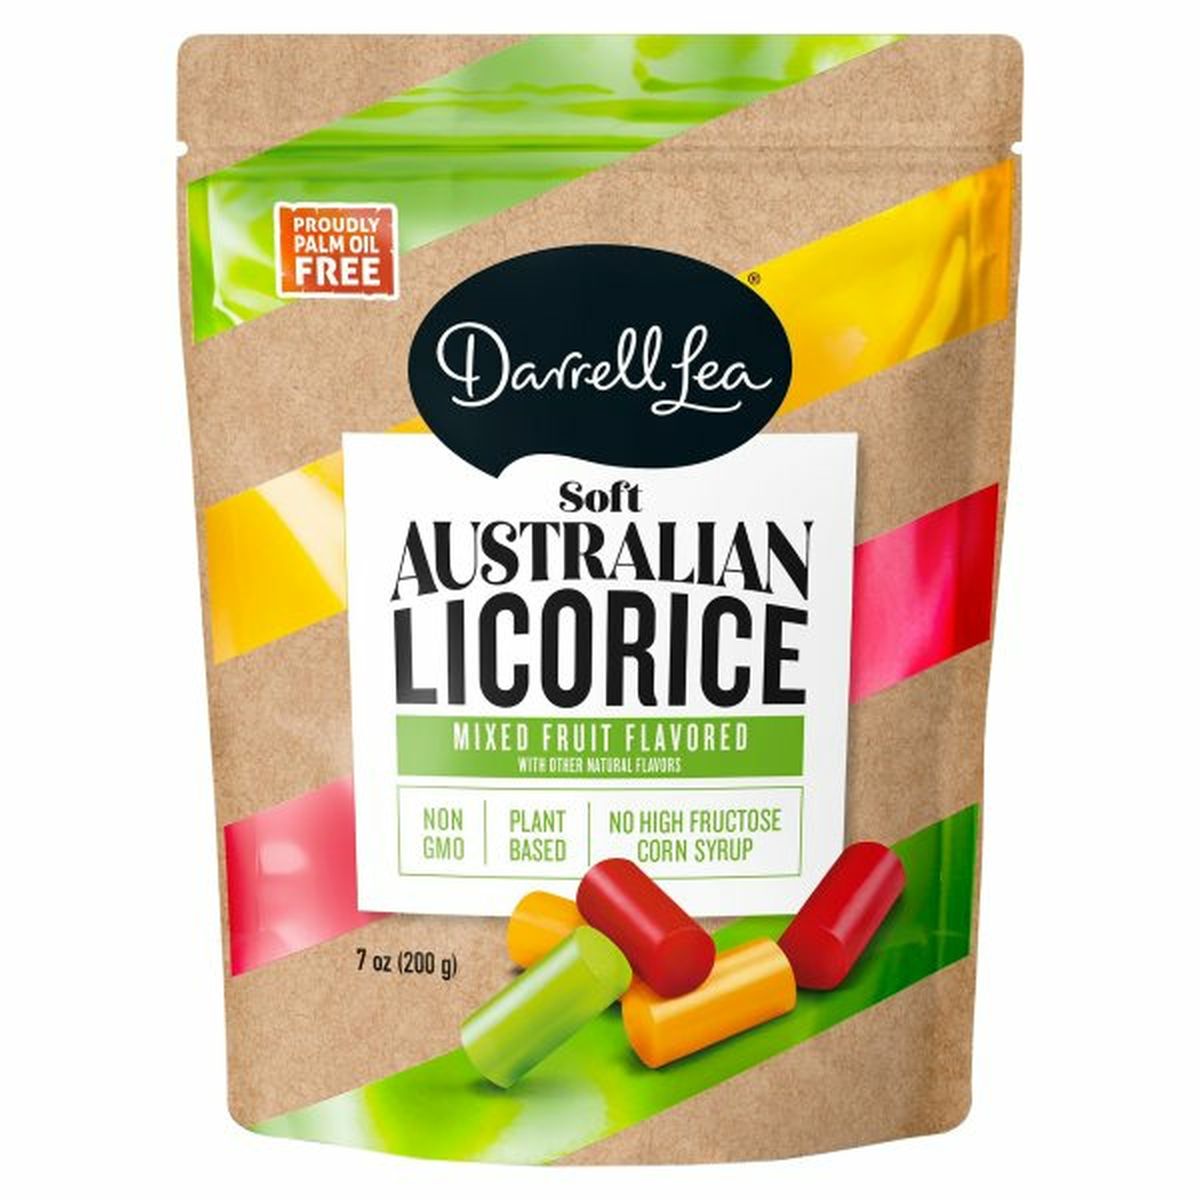 Calories in Darrell Lea Australian Licorice, Mixed Fruit Flavored, Soft